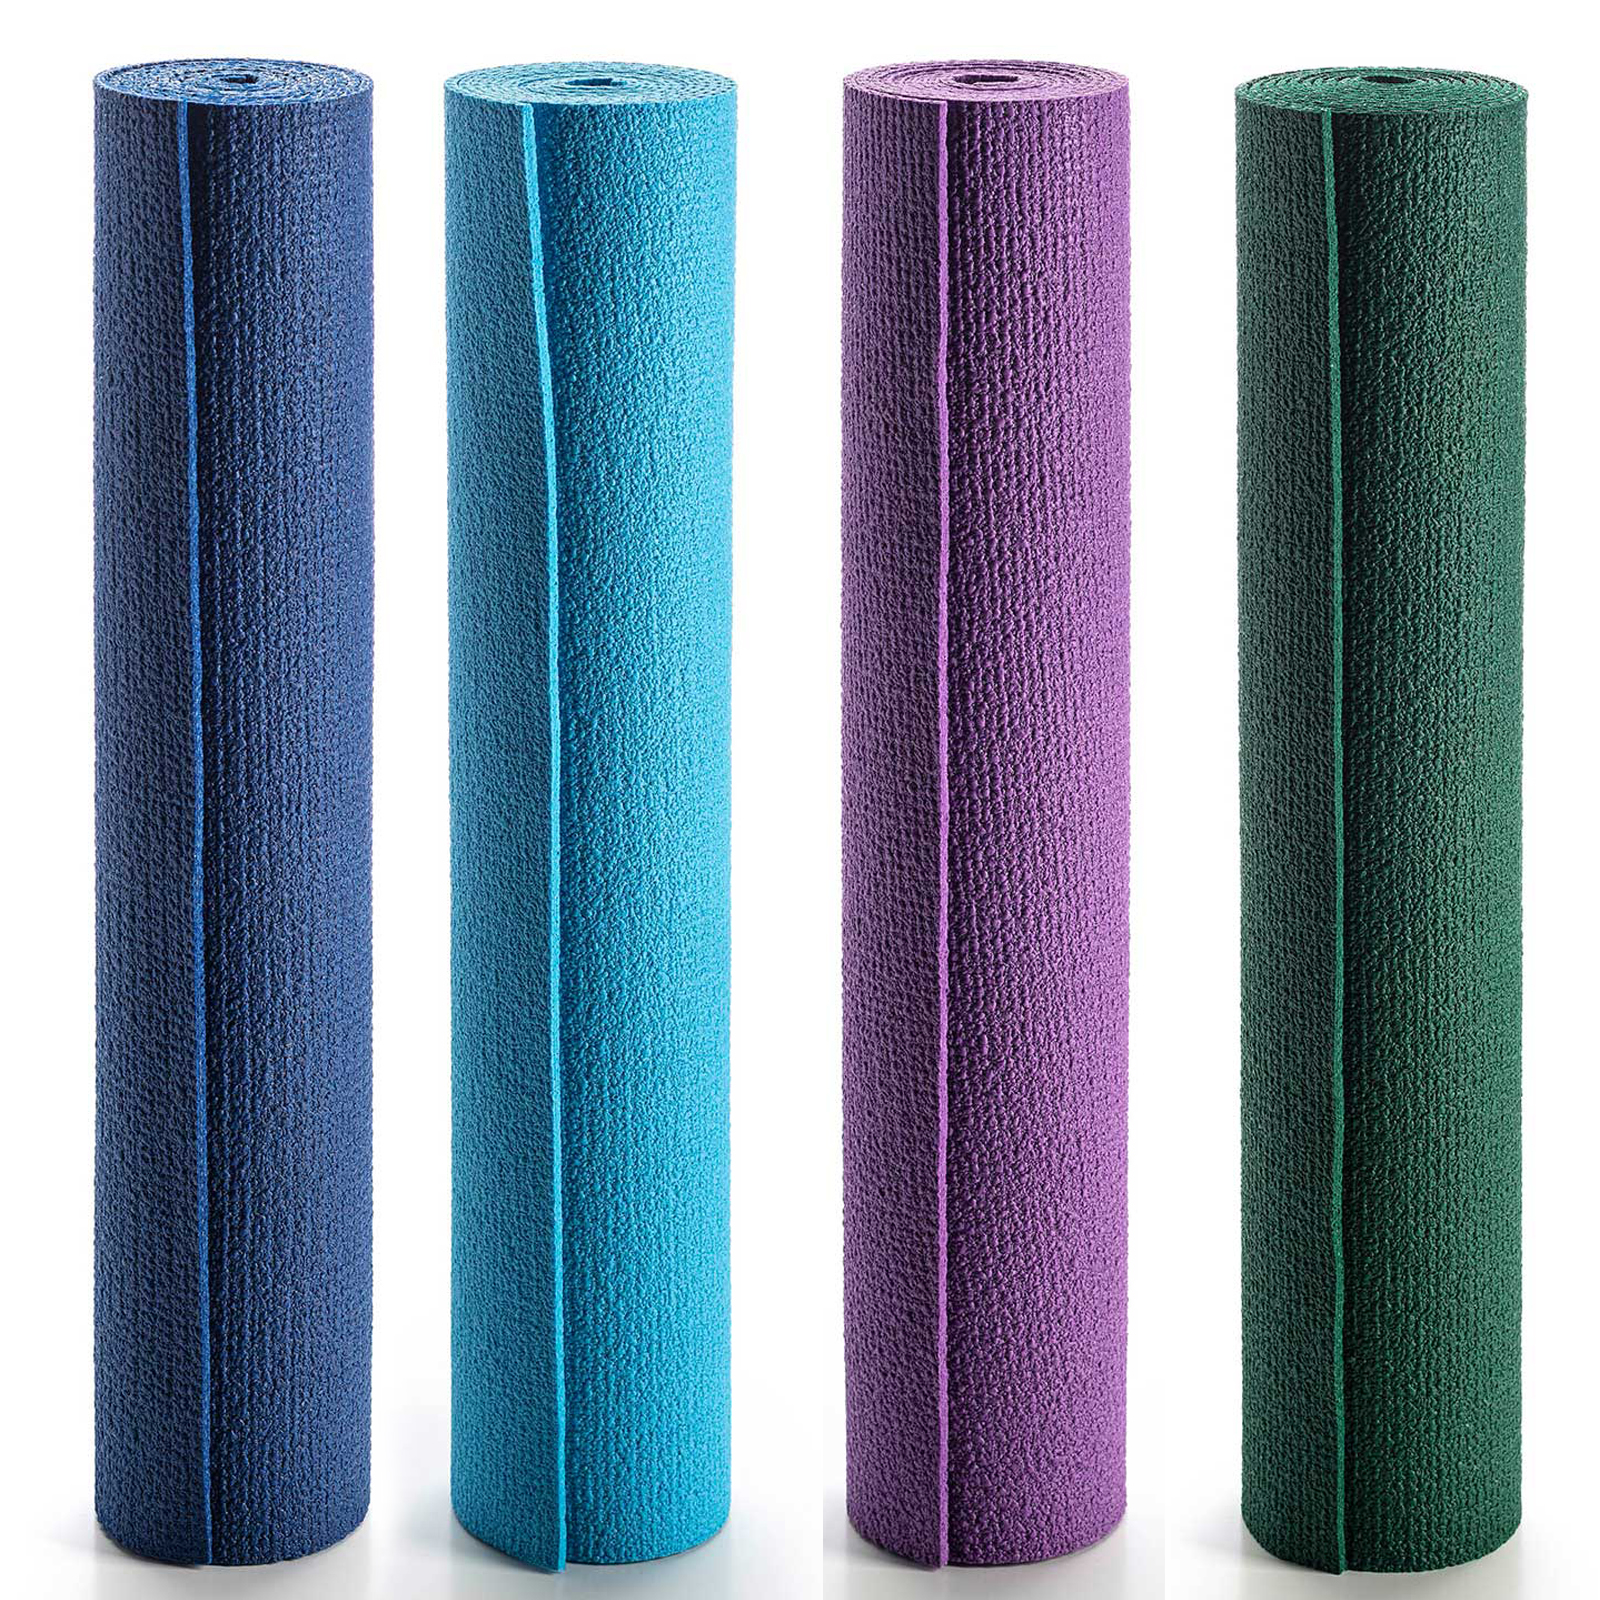 Kurma Extra Long /& Extra Wide Grip Non-Slip Premium Yoga Mat Made In Germany